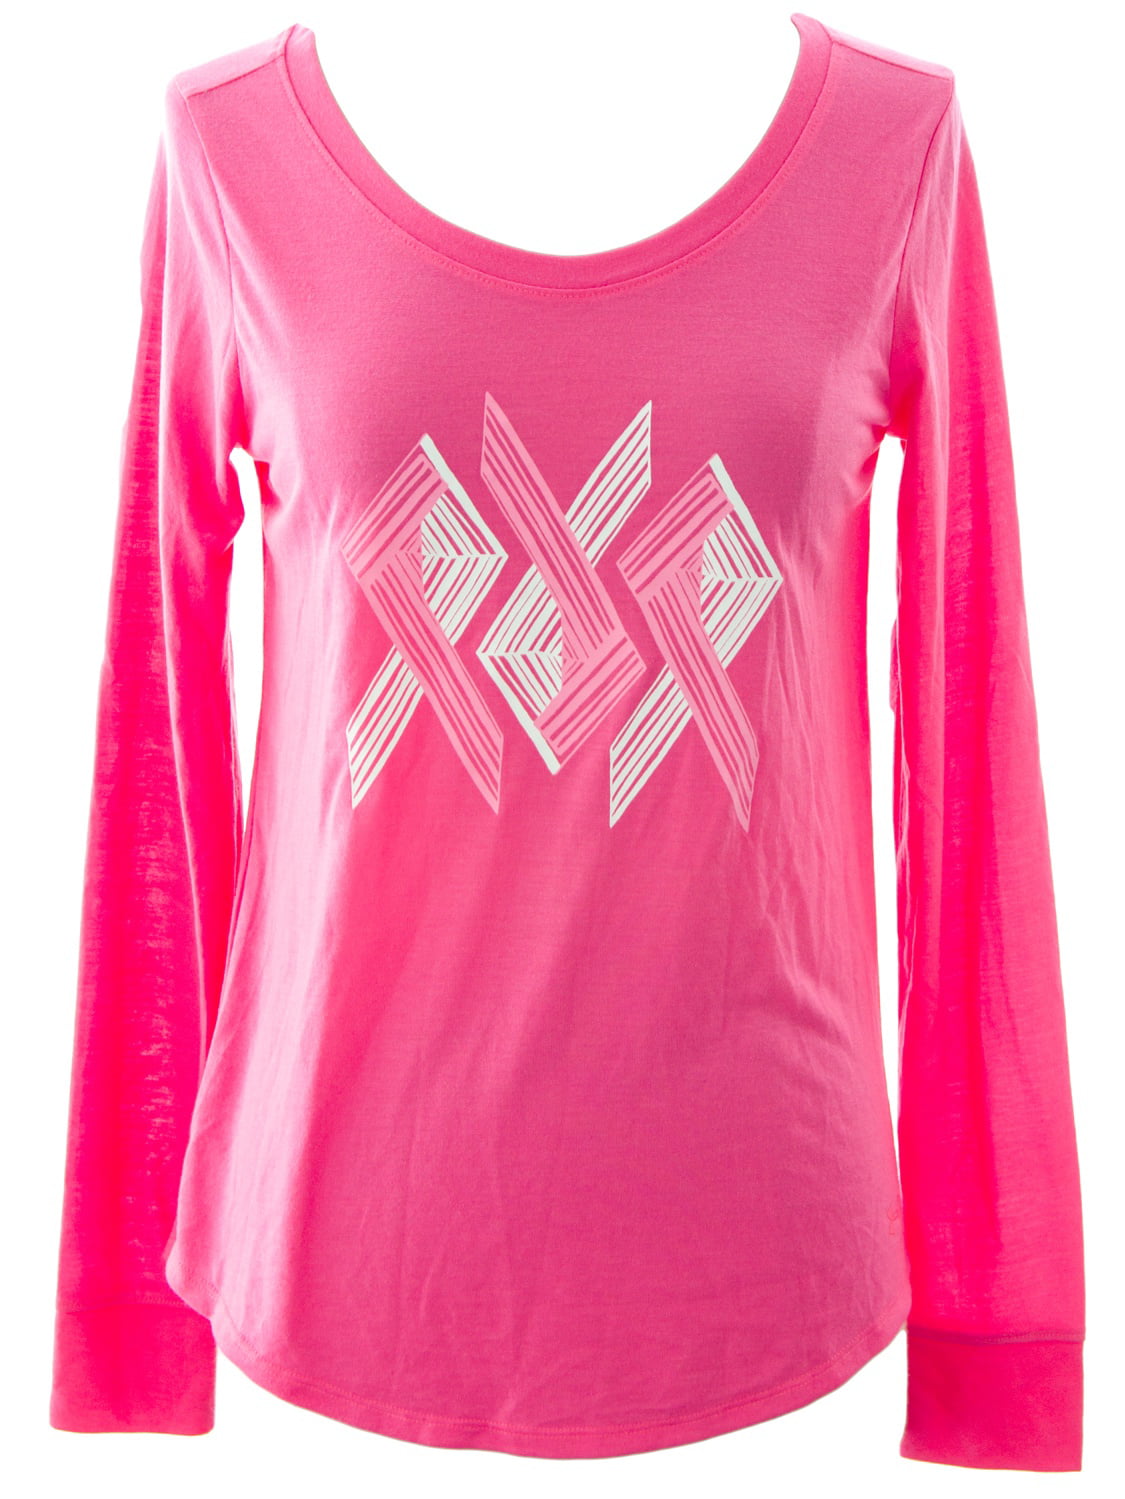 Under Armour Men,Women or Girls' "Power In Pink" Shirts Tanks OR Accessories 